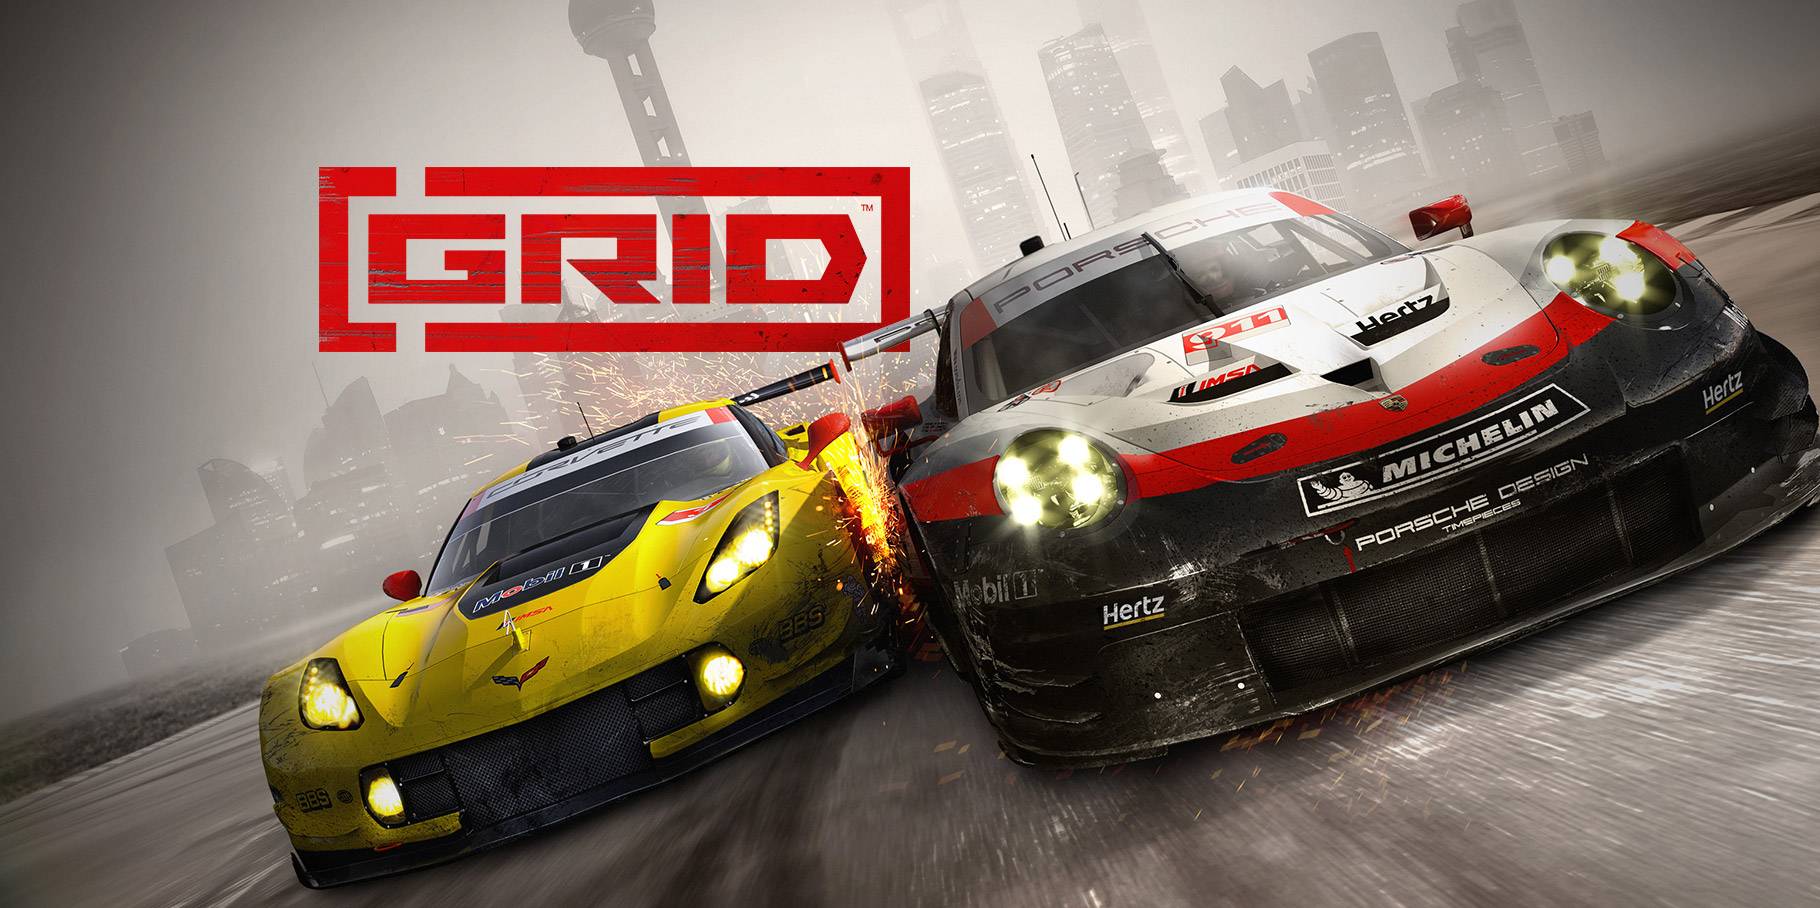 The launch of GRID 2019 is delayed by a month